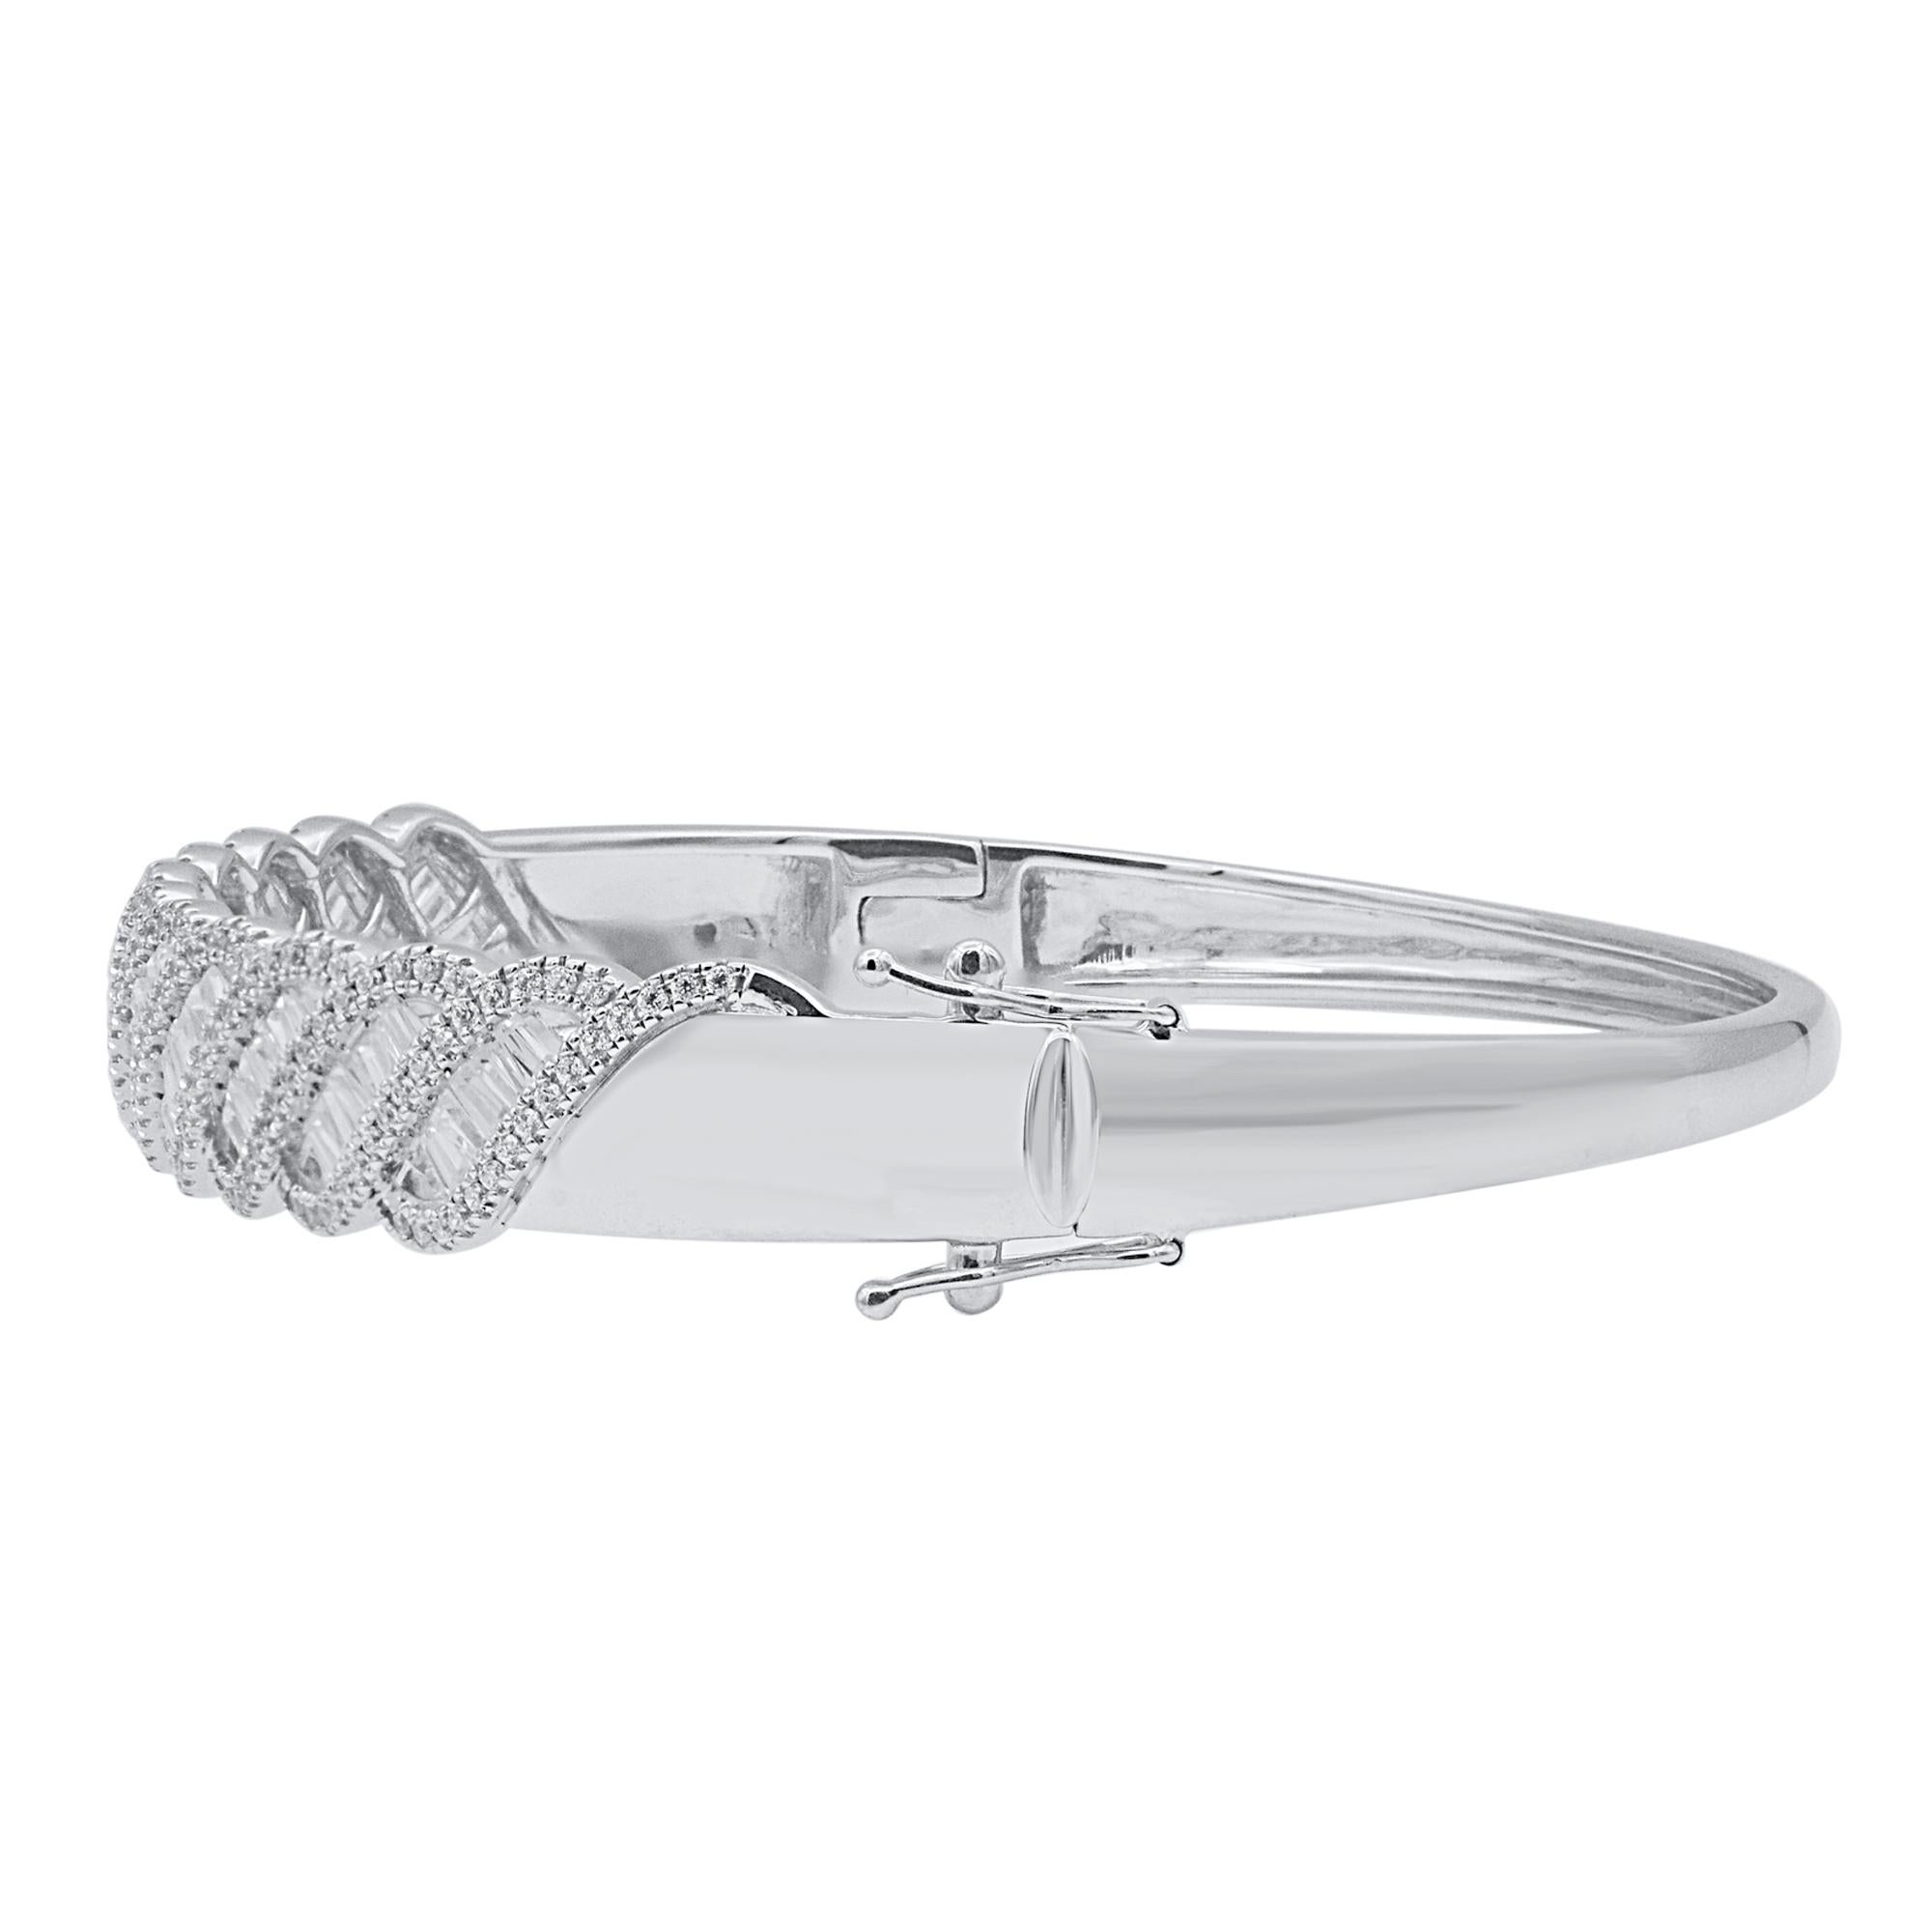 Classic and sophisticated, this diamond bangle bracelet pairs well with any attire.
This Shimmering bangle features 267 natural single cut & baguette diamonds in prong and Channel setting and crafted in 18 kt white gold. Diamonds are graded H-I